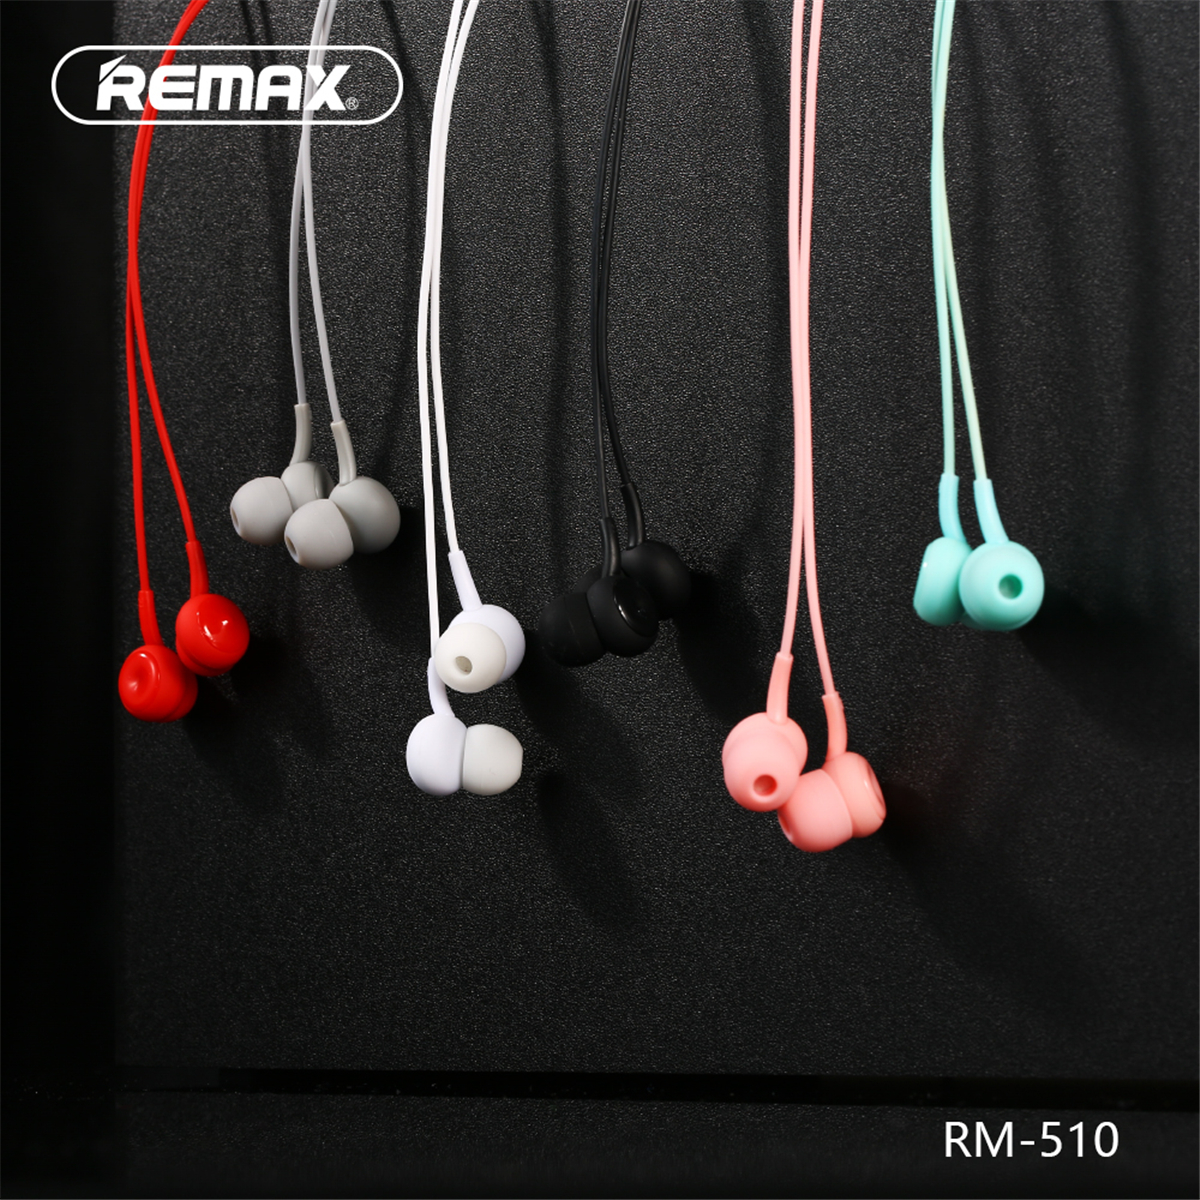 Remax-RM-510-35mm-Wired-Control-Earbuds-Earphone-In-ear-Stereo-Light-Headphone-with-Mic-1515466-1